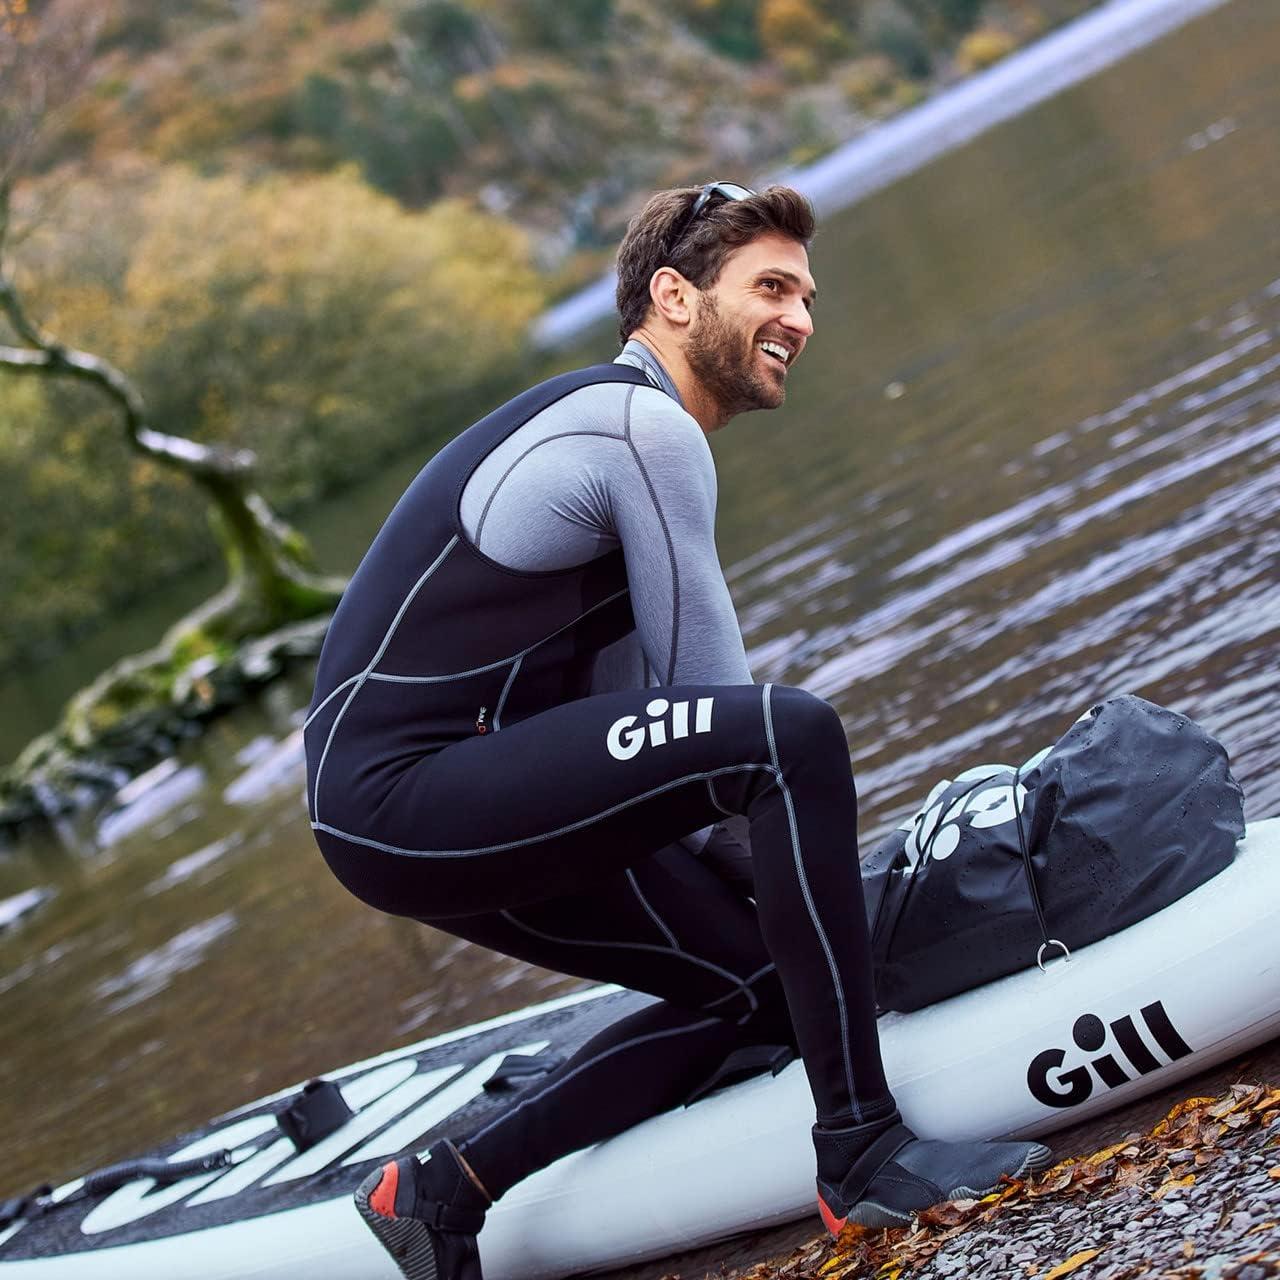 Full Arm Pursuit Wetsuit From Gill